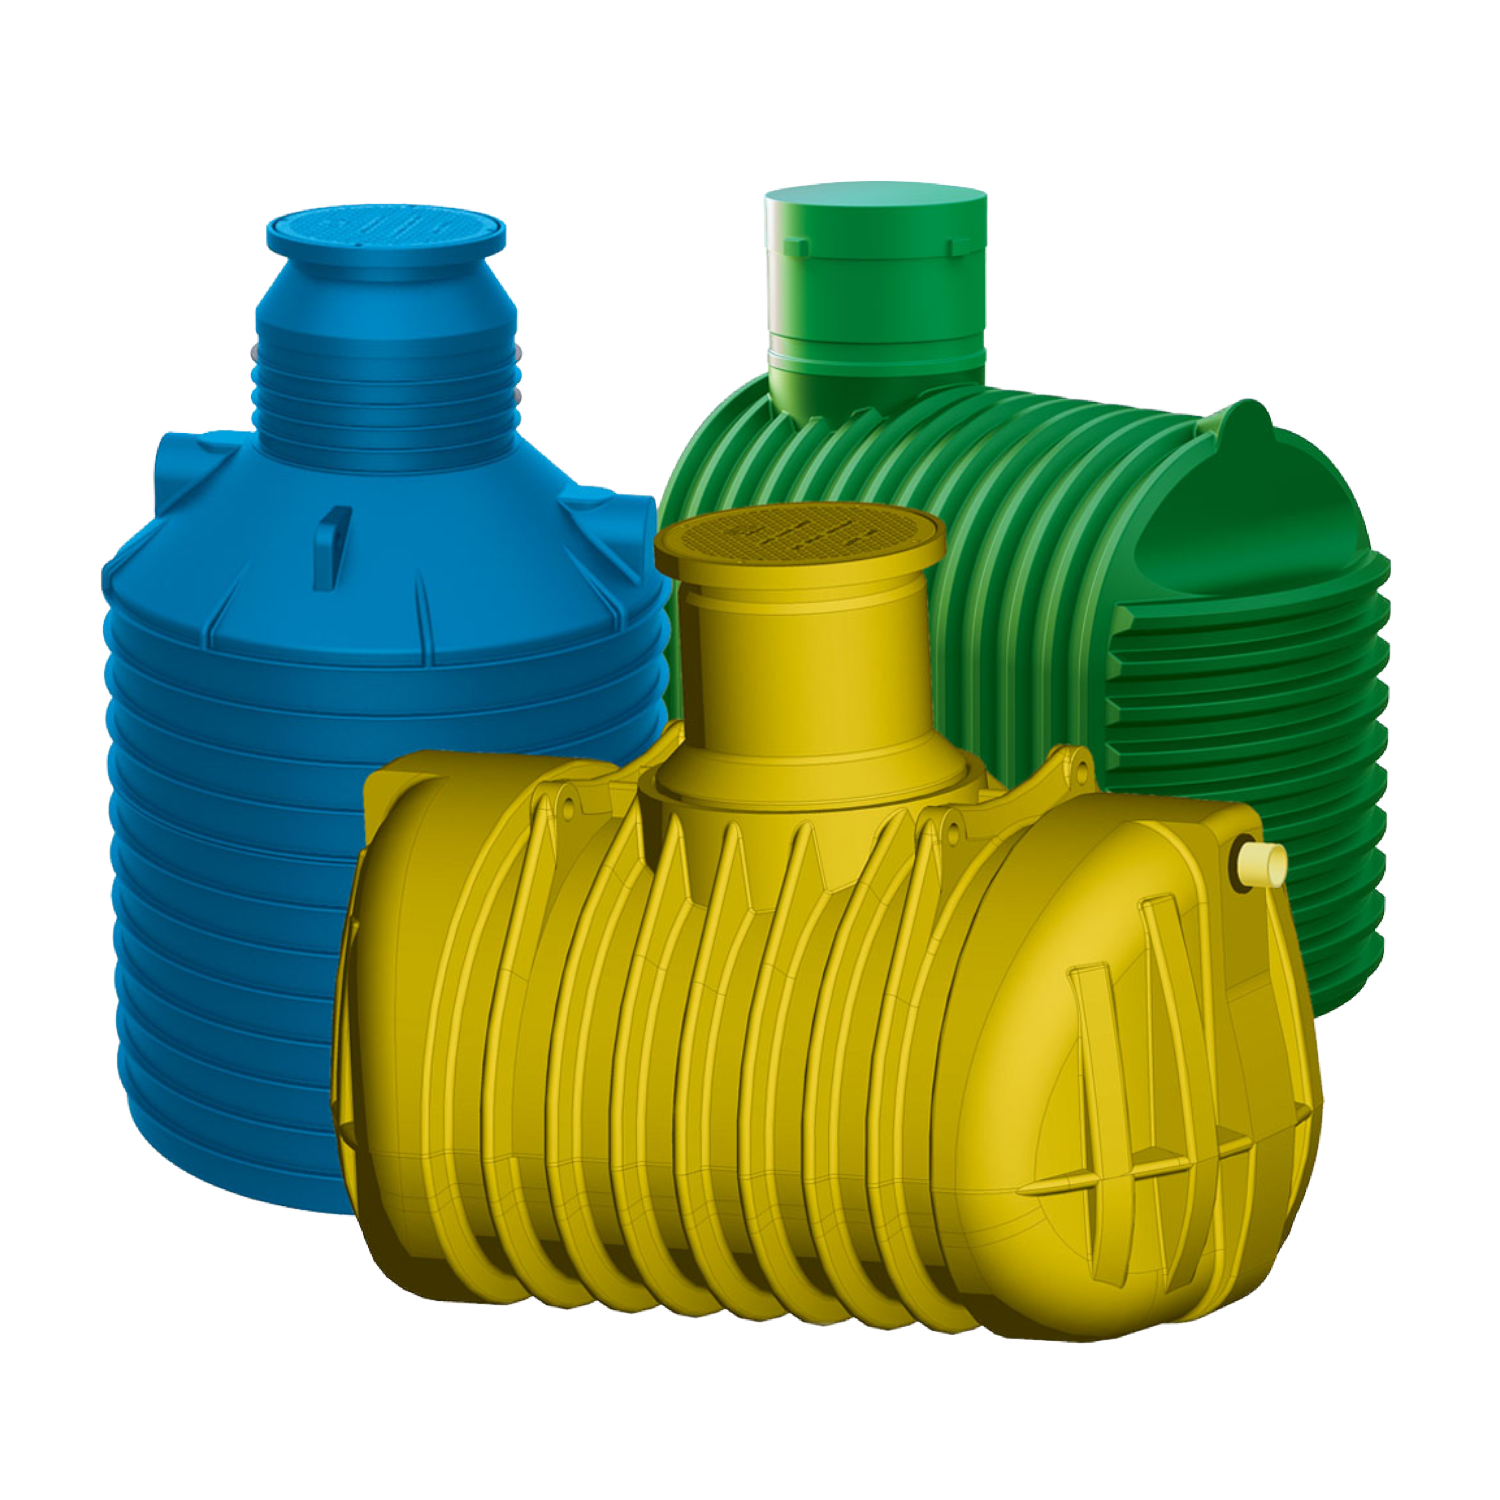 Septic Tanks and Pumping Stations